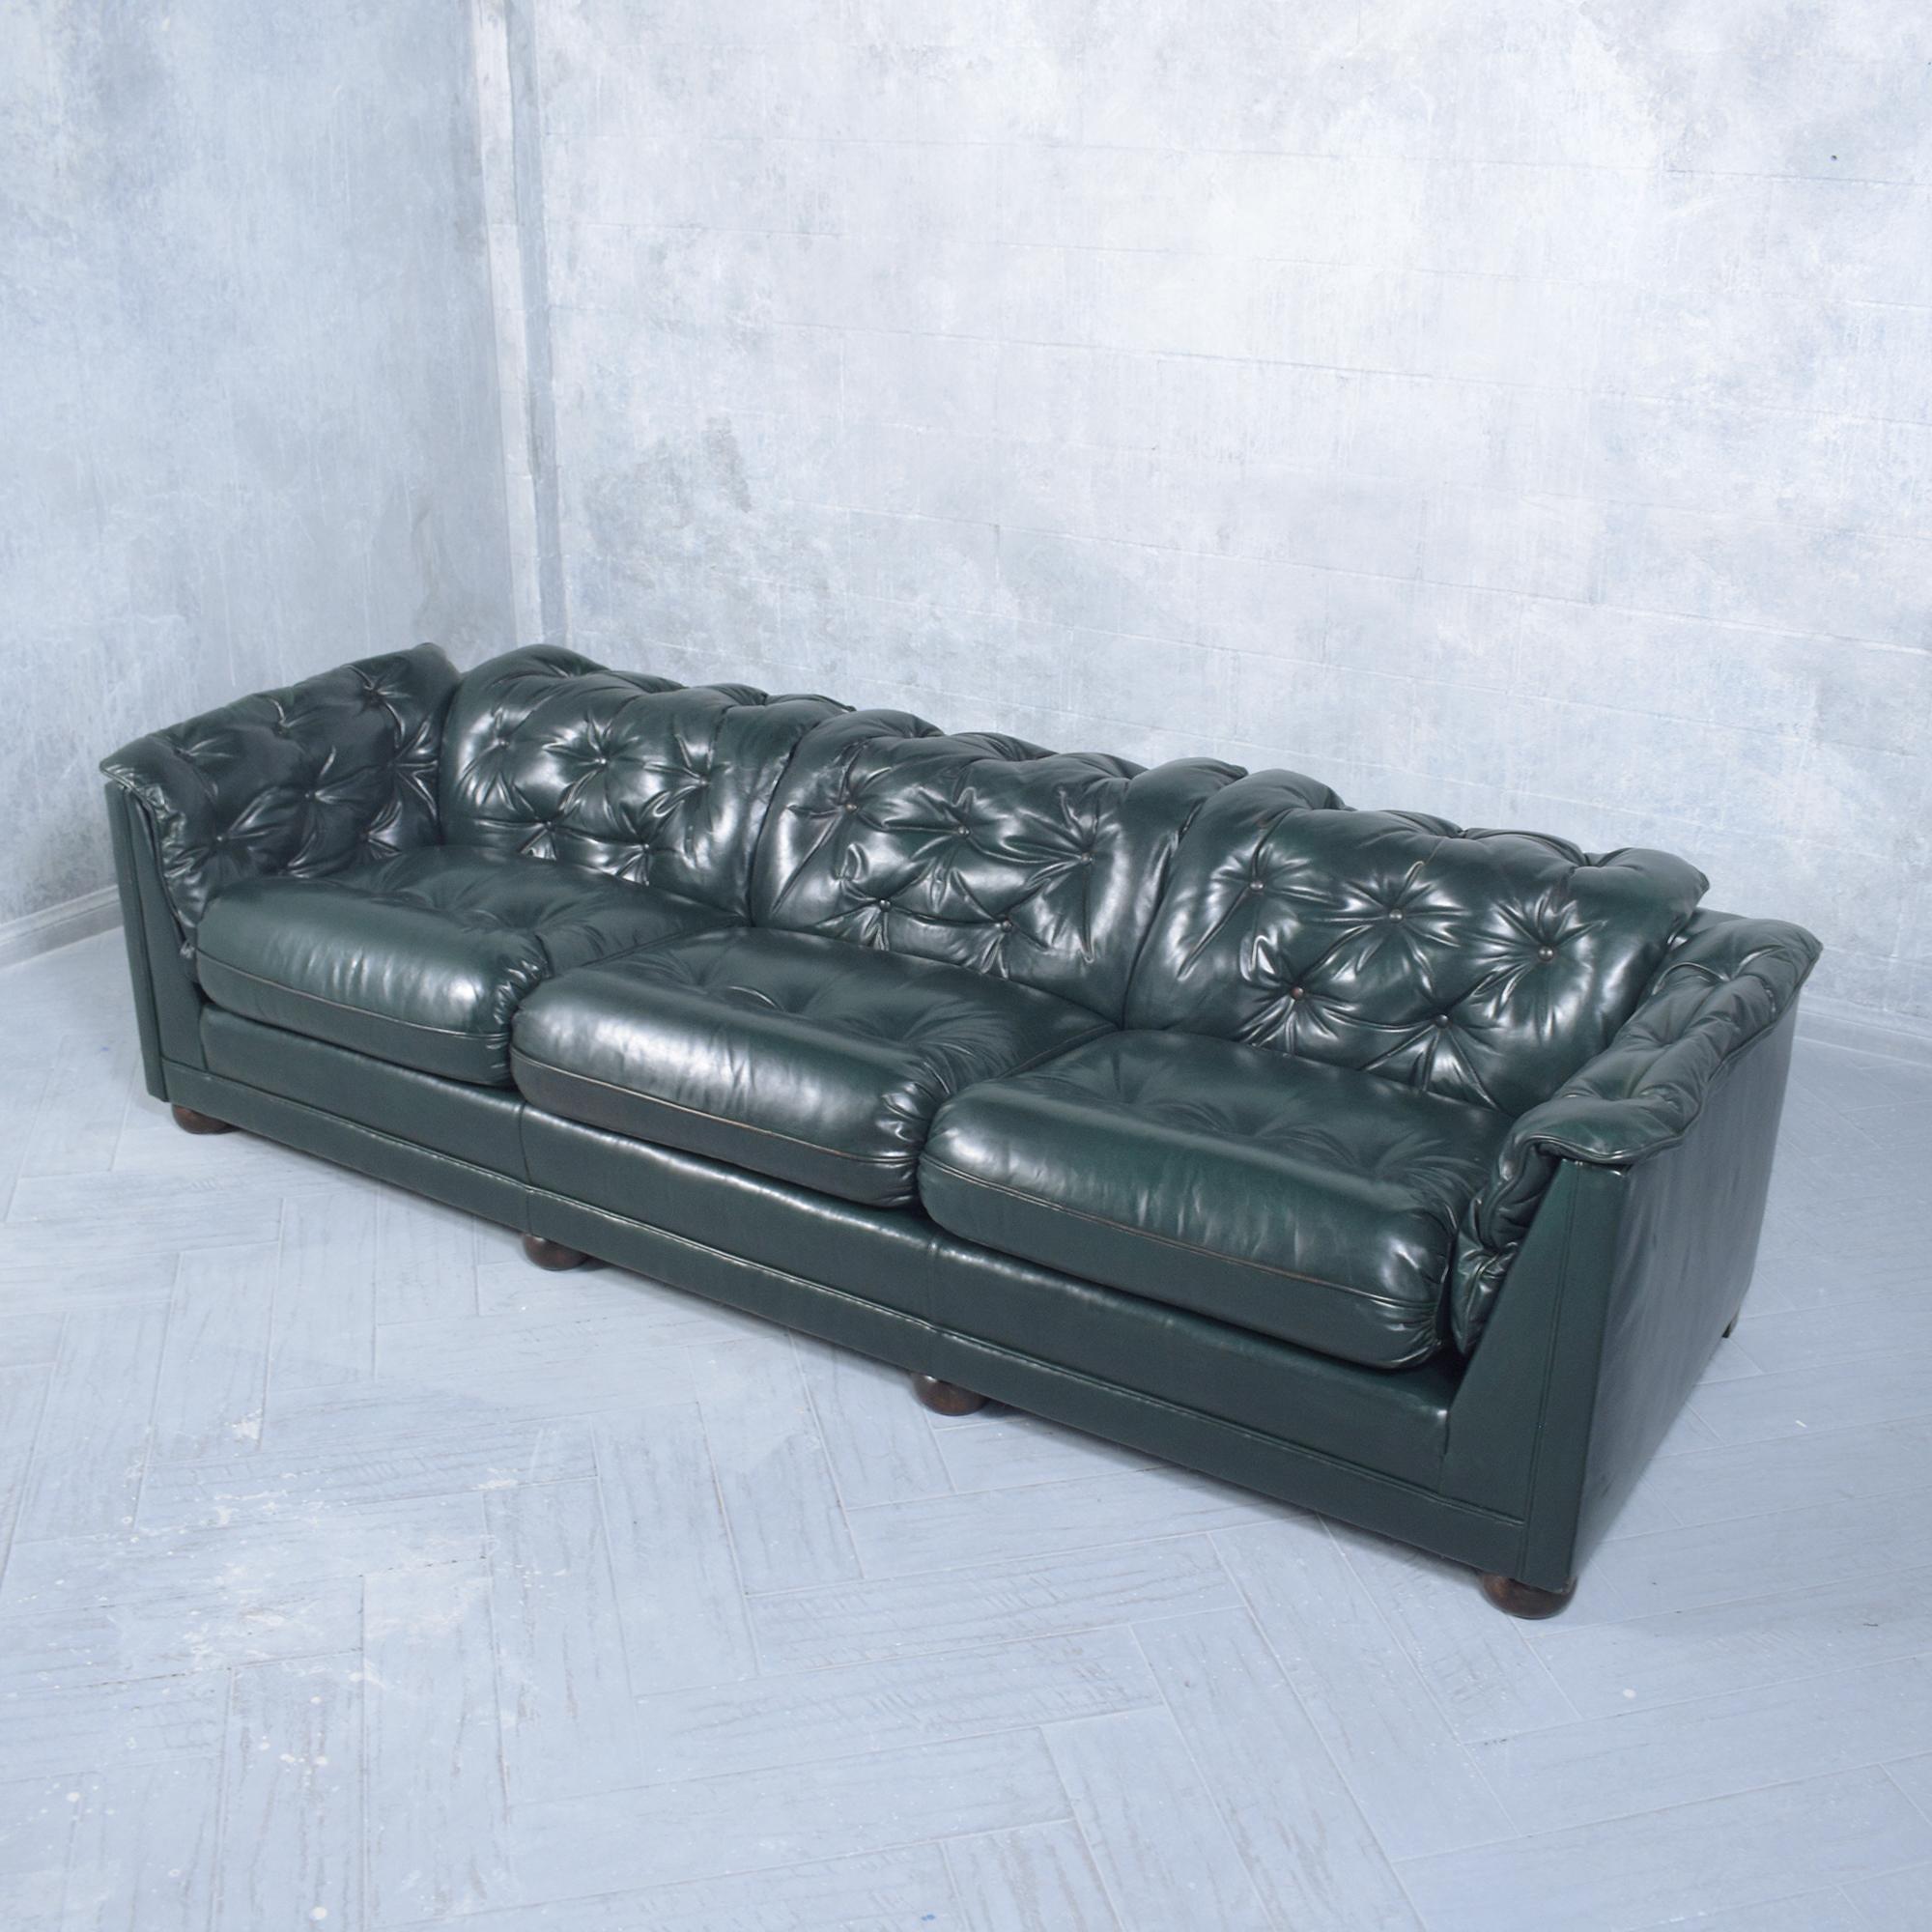 Mid-20th Century 1960s Vintage Emerald Green Tufted Chesterfield Leather Sofa